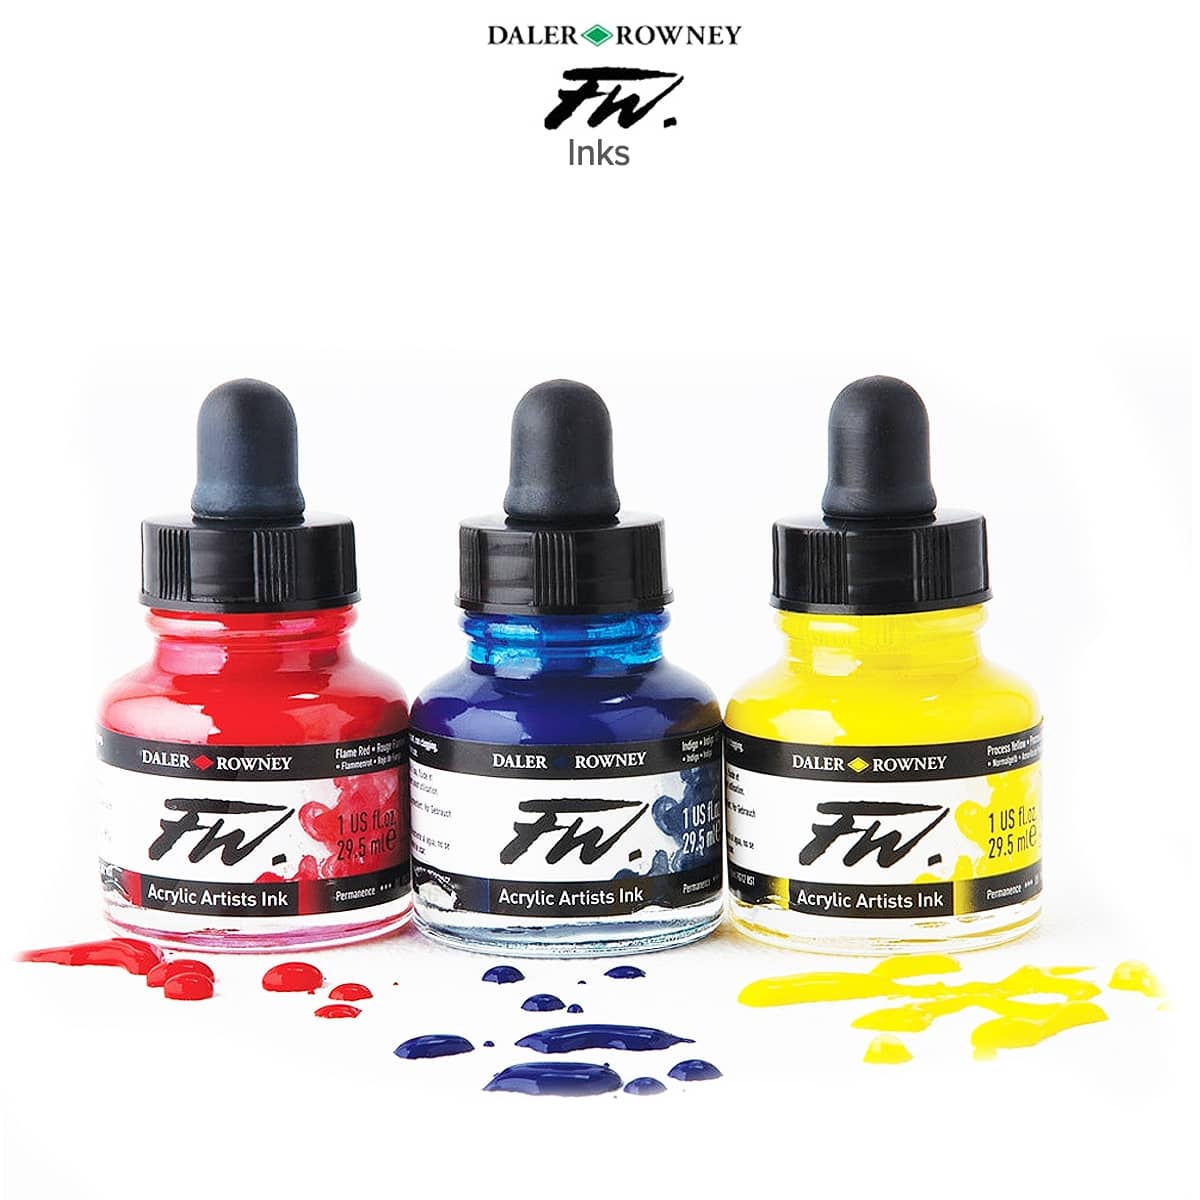 Daler-Rowney FW Acrylic Water-Resistant Artists Inks